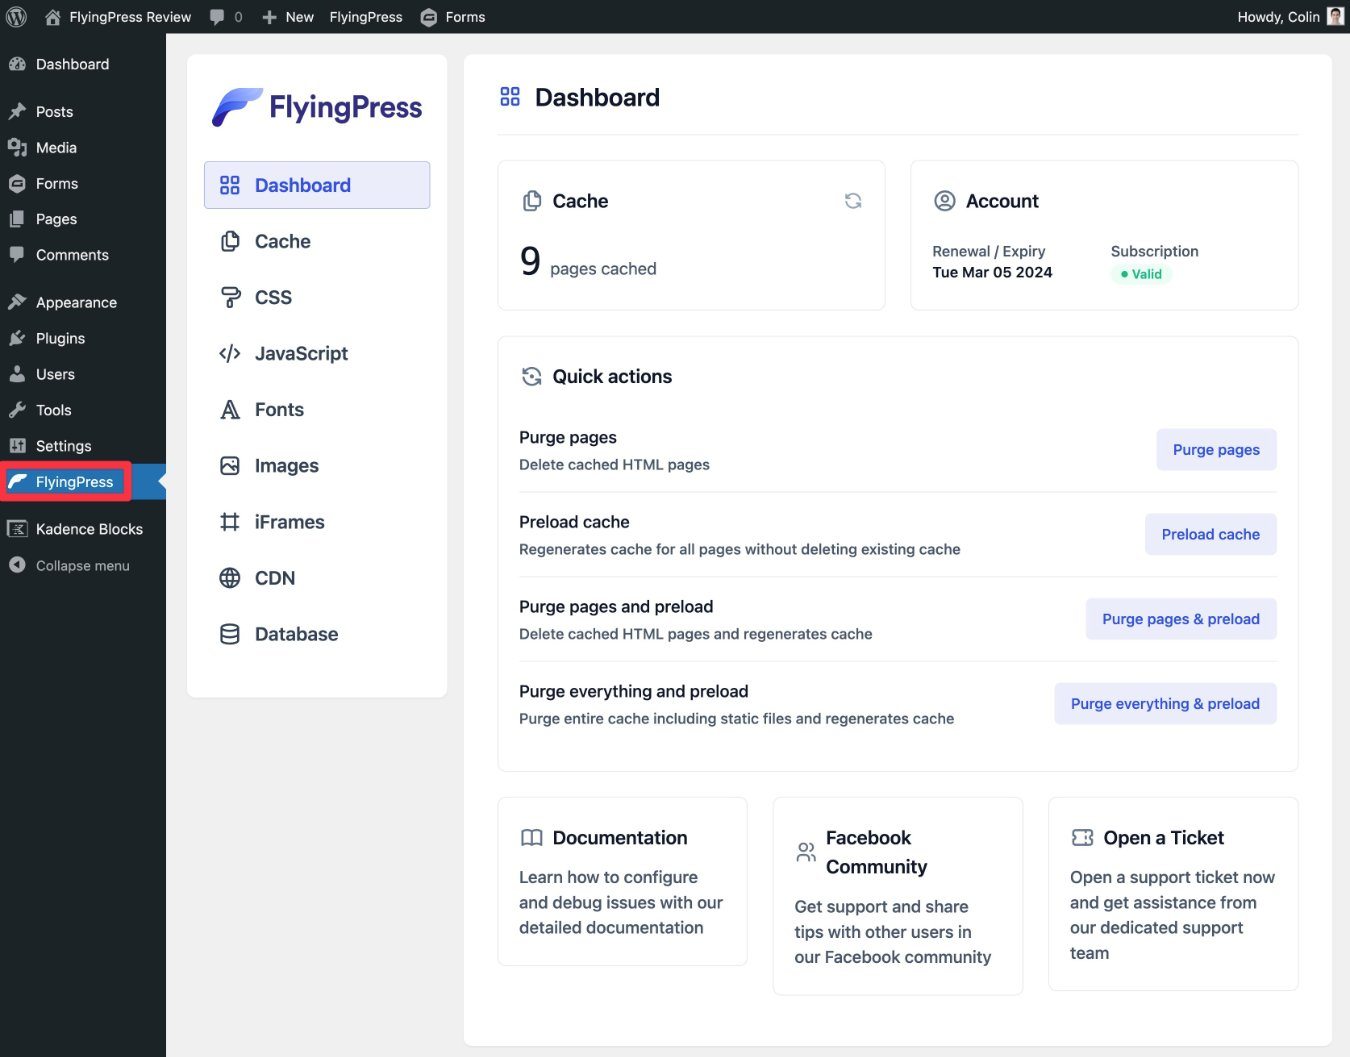 FlyingPress dashboard review